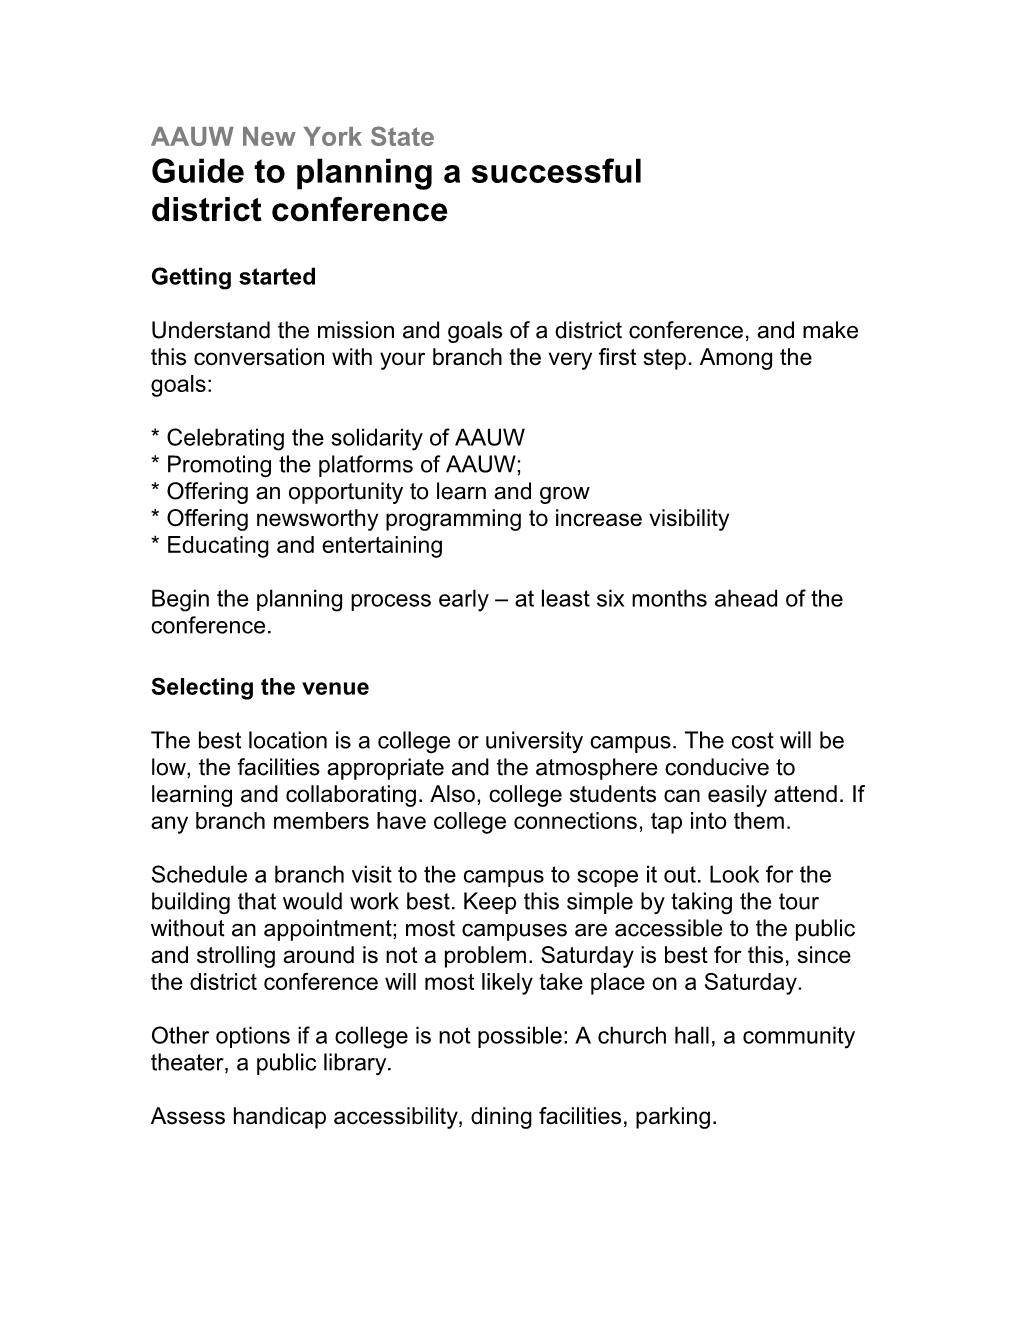 AAUW New York State / Guide to Planning